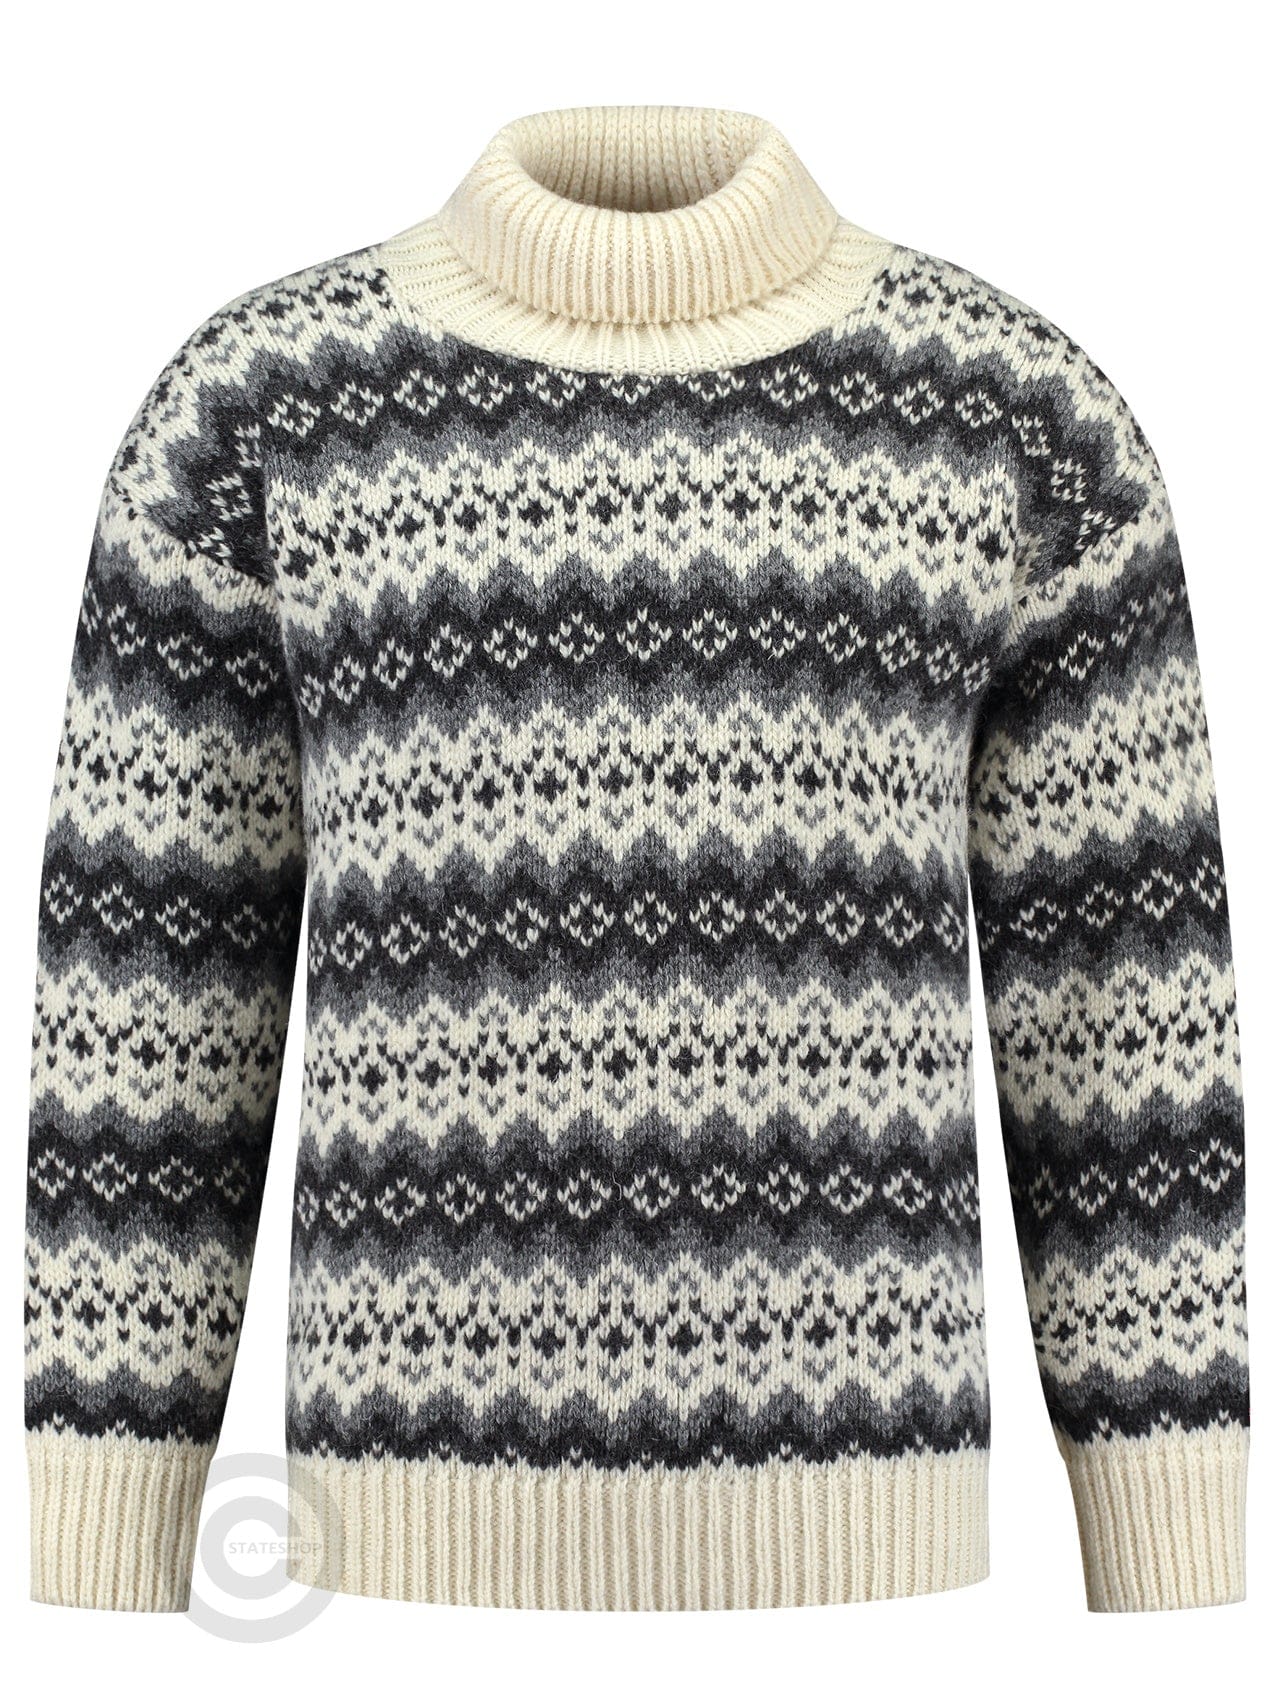 NorfindeIcelandic sweater with roll neck of 100% pure new